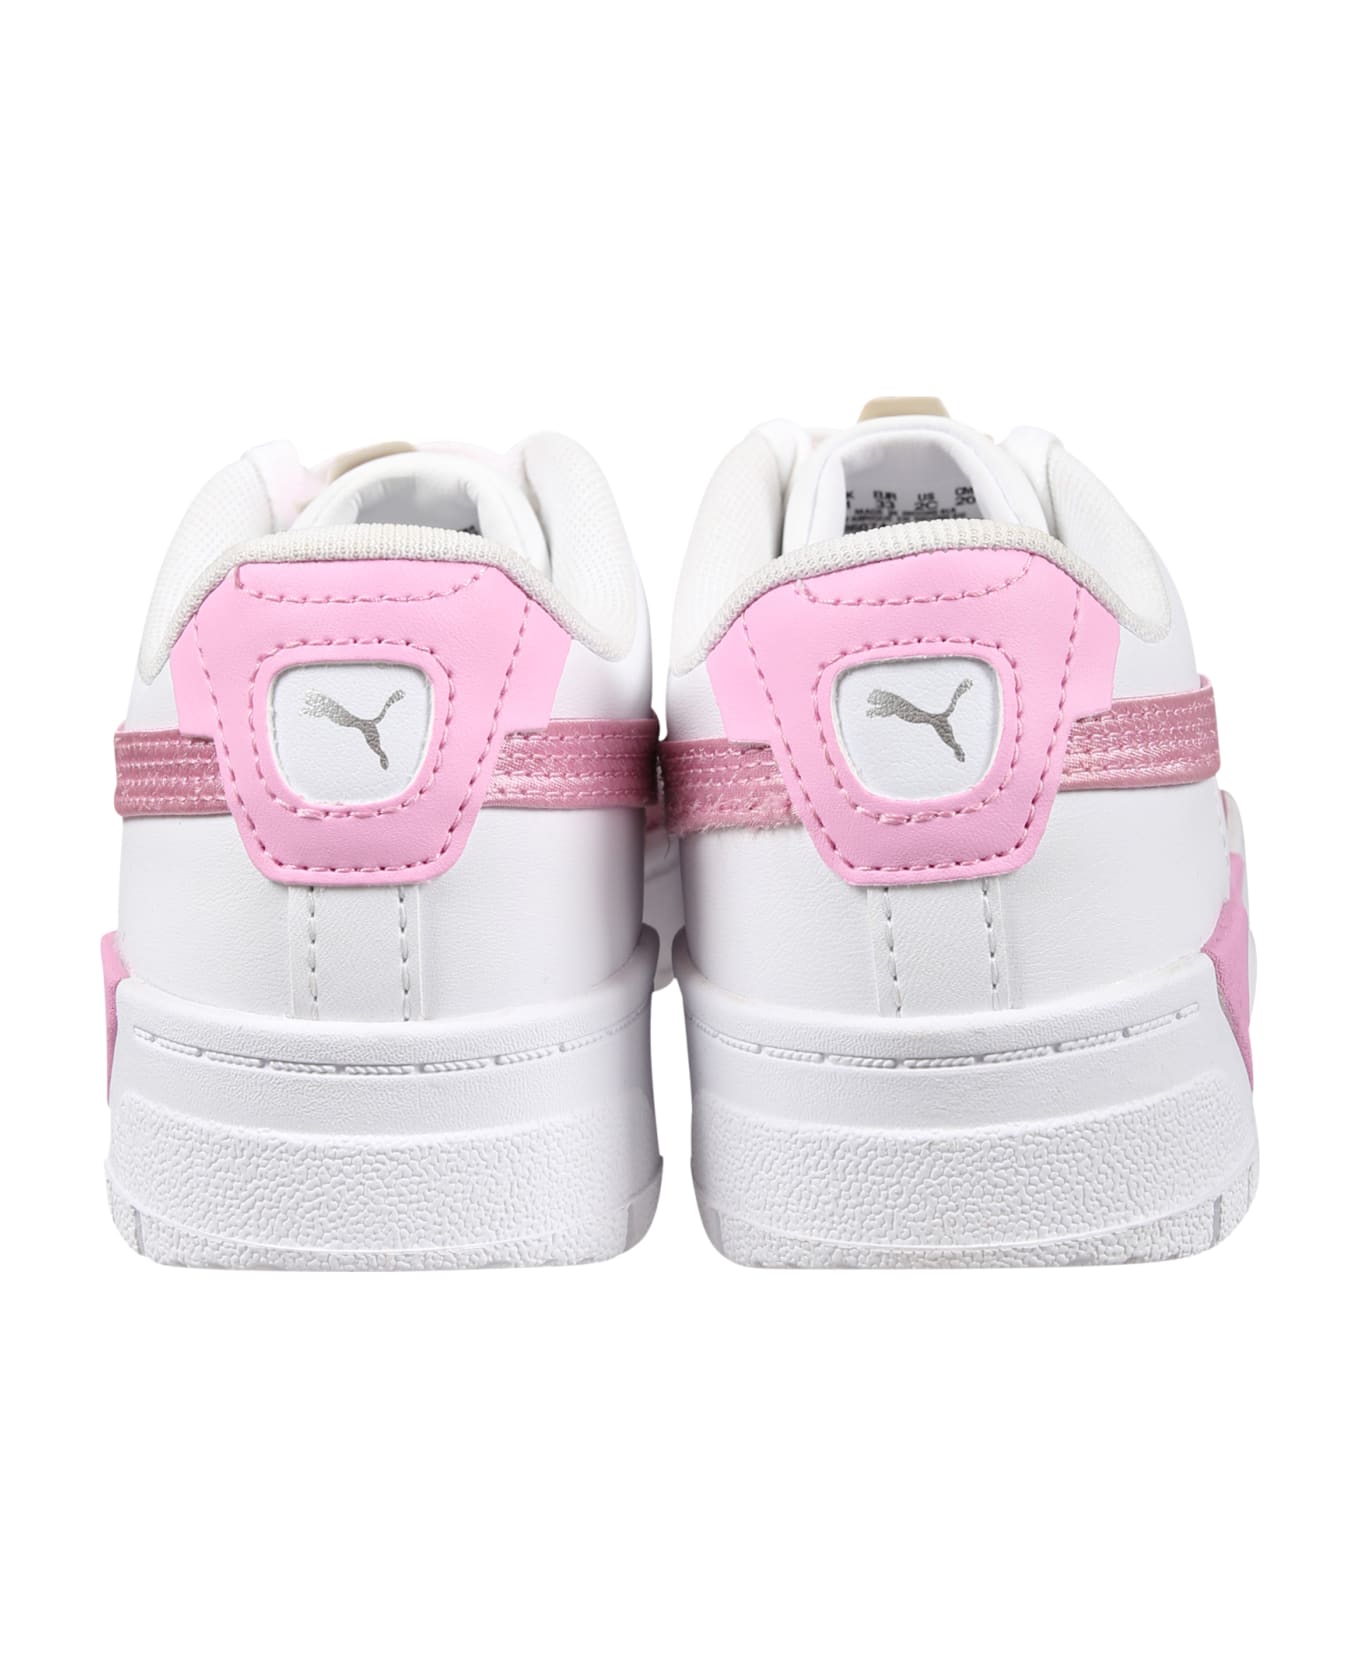 Puma White Sneakers For Girl With Logo - White シューズ